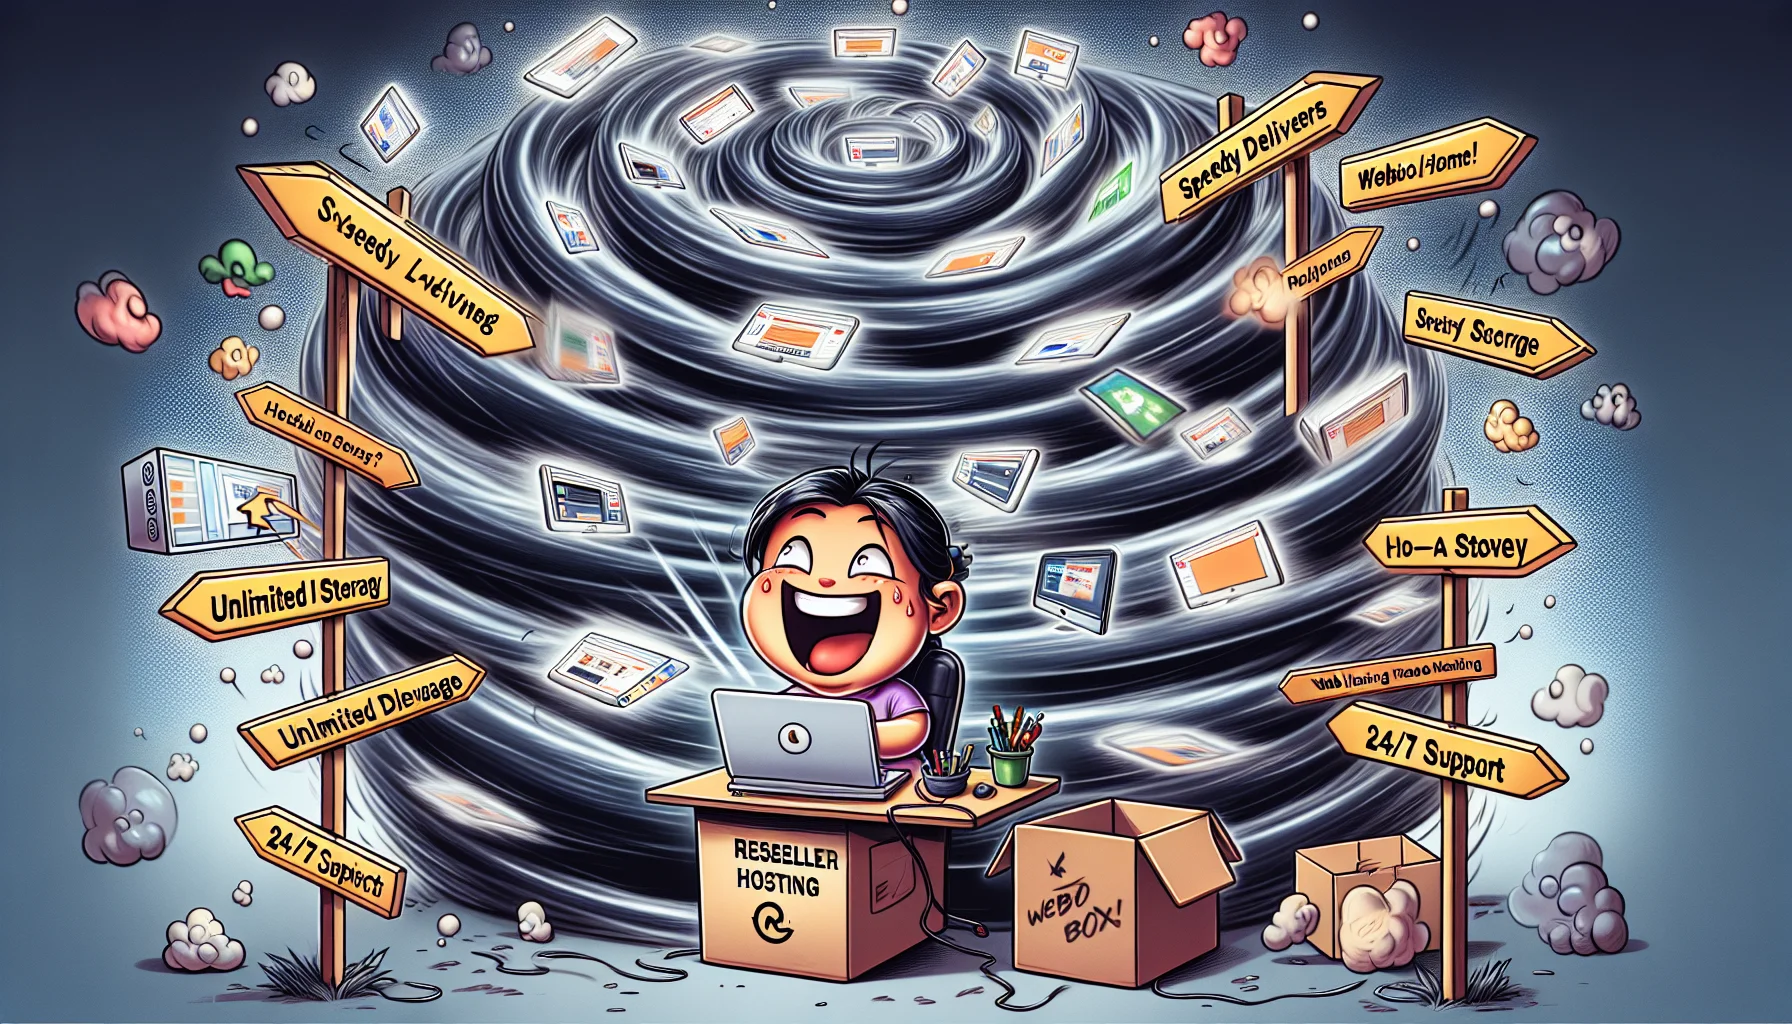 Imagine a hilarious scene showcasing the concept of reseller hosting. In the middle of the scene, an excited character, an Asian woman, sits in front of a computer screen, which displays a digital whirlwind of websites swirling around in motion. She's laughing joyfully as a handful of 'website' icons fly from the screen into a box labeled 'Hosting Box.' Next to her, a humorous signpost contains arrows pointing in various directions, marked with terms like 'Speedy Deliveries,' 'Unlimited Storage,' and '24/7 Support.' It's a light-hearted take on web hosting, making the process seem fun and easy.